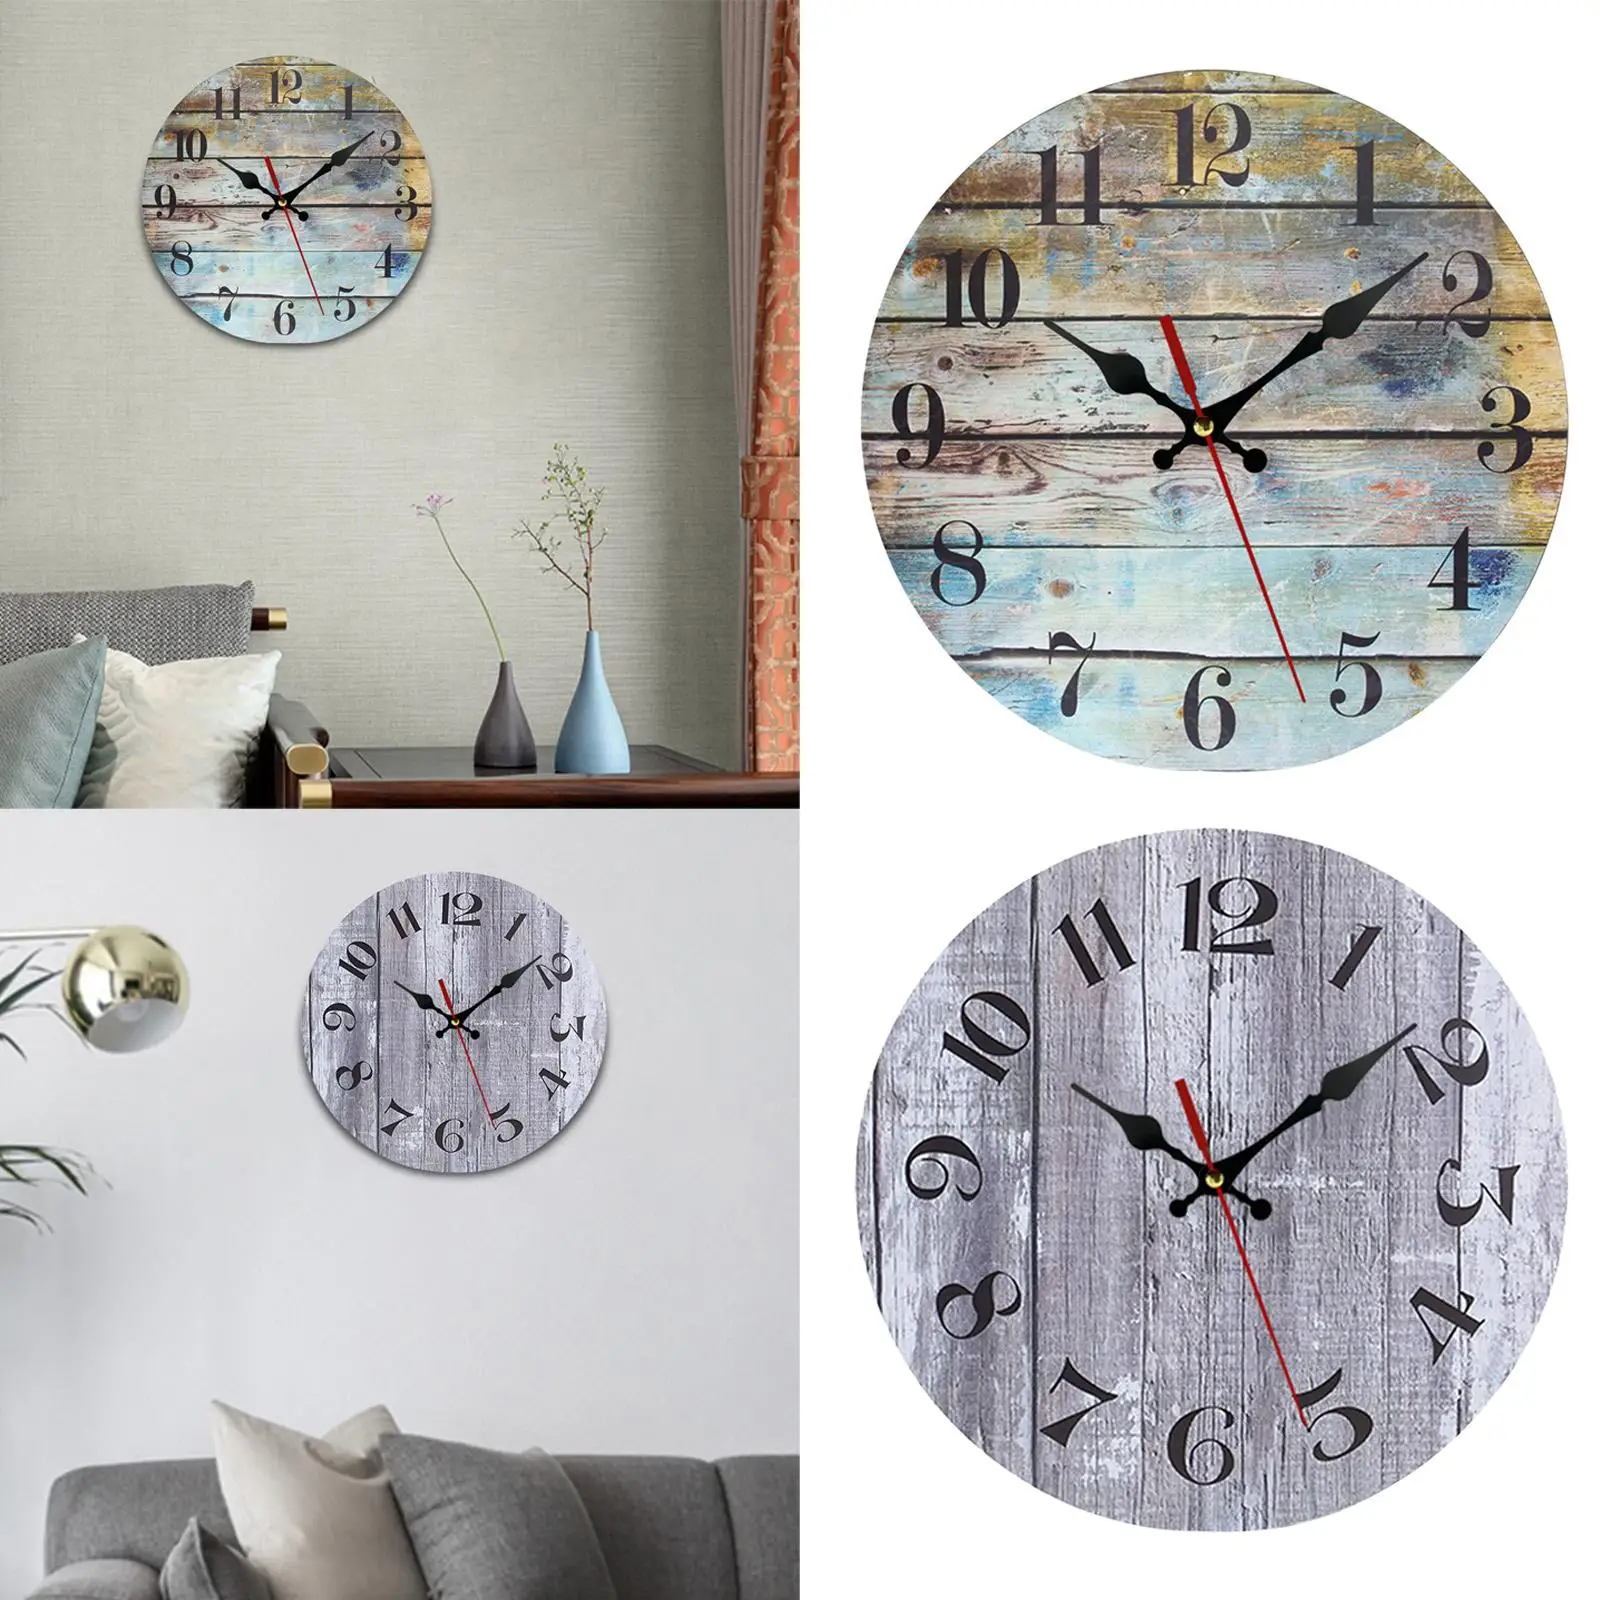 Rustic Hanging Clocks Battery Operated Silent Quartz Clock 9.8inch Wood Wall Clock for Farmhouse Bedroom Office Home Bedside